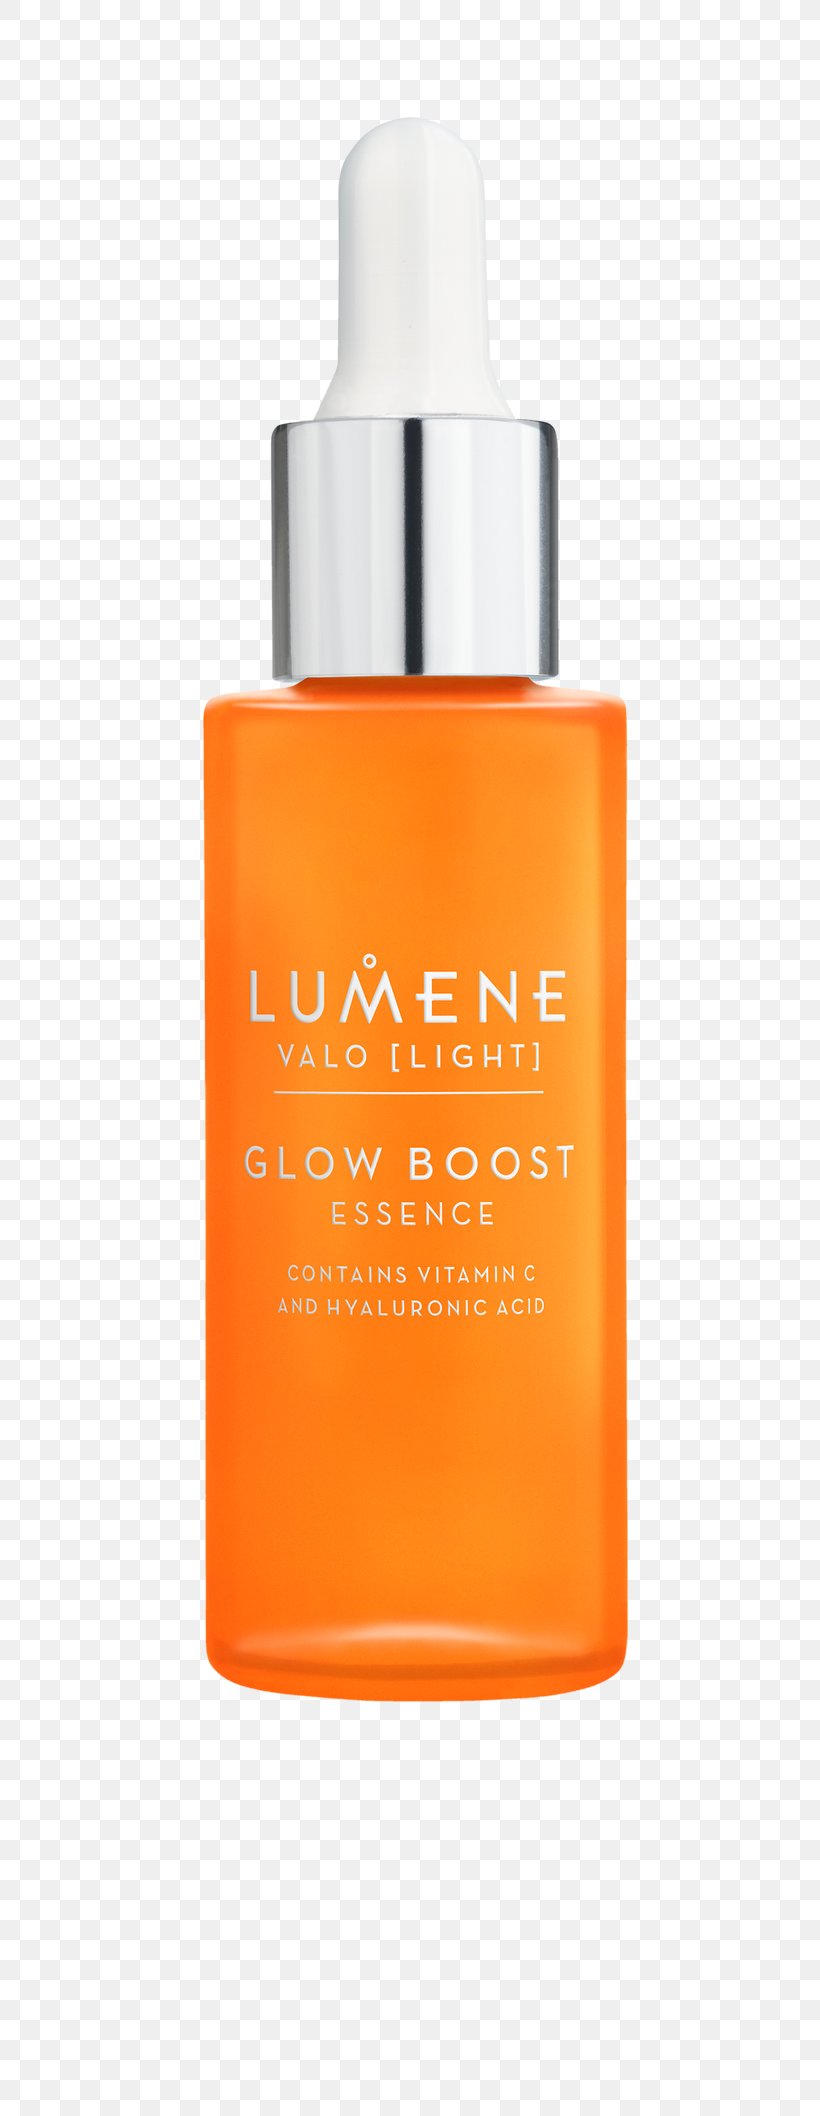 Lotion Lumene Valo Glow Boost Essence Moisturizer Cream, PNG, 665x2116px, Lotion, Cosmetics, Cream, Facial, Hyaluronic Acid Download Free